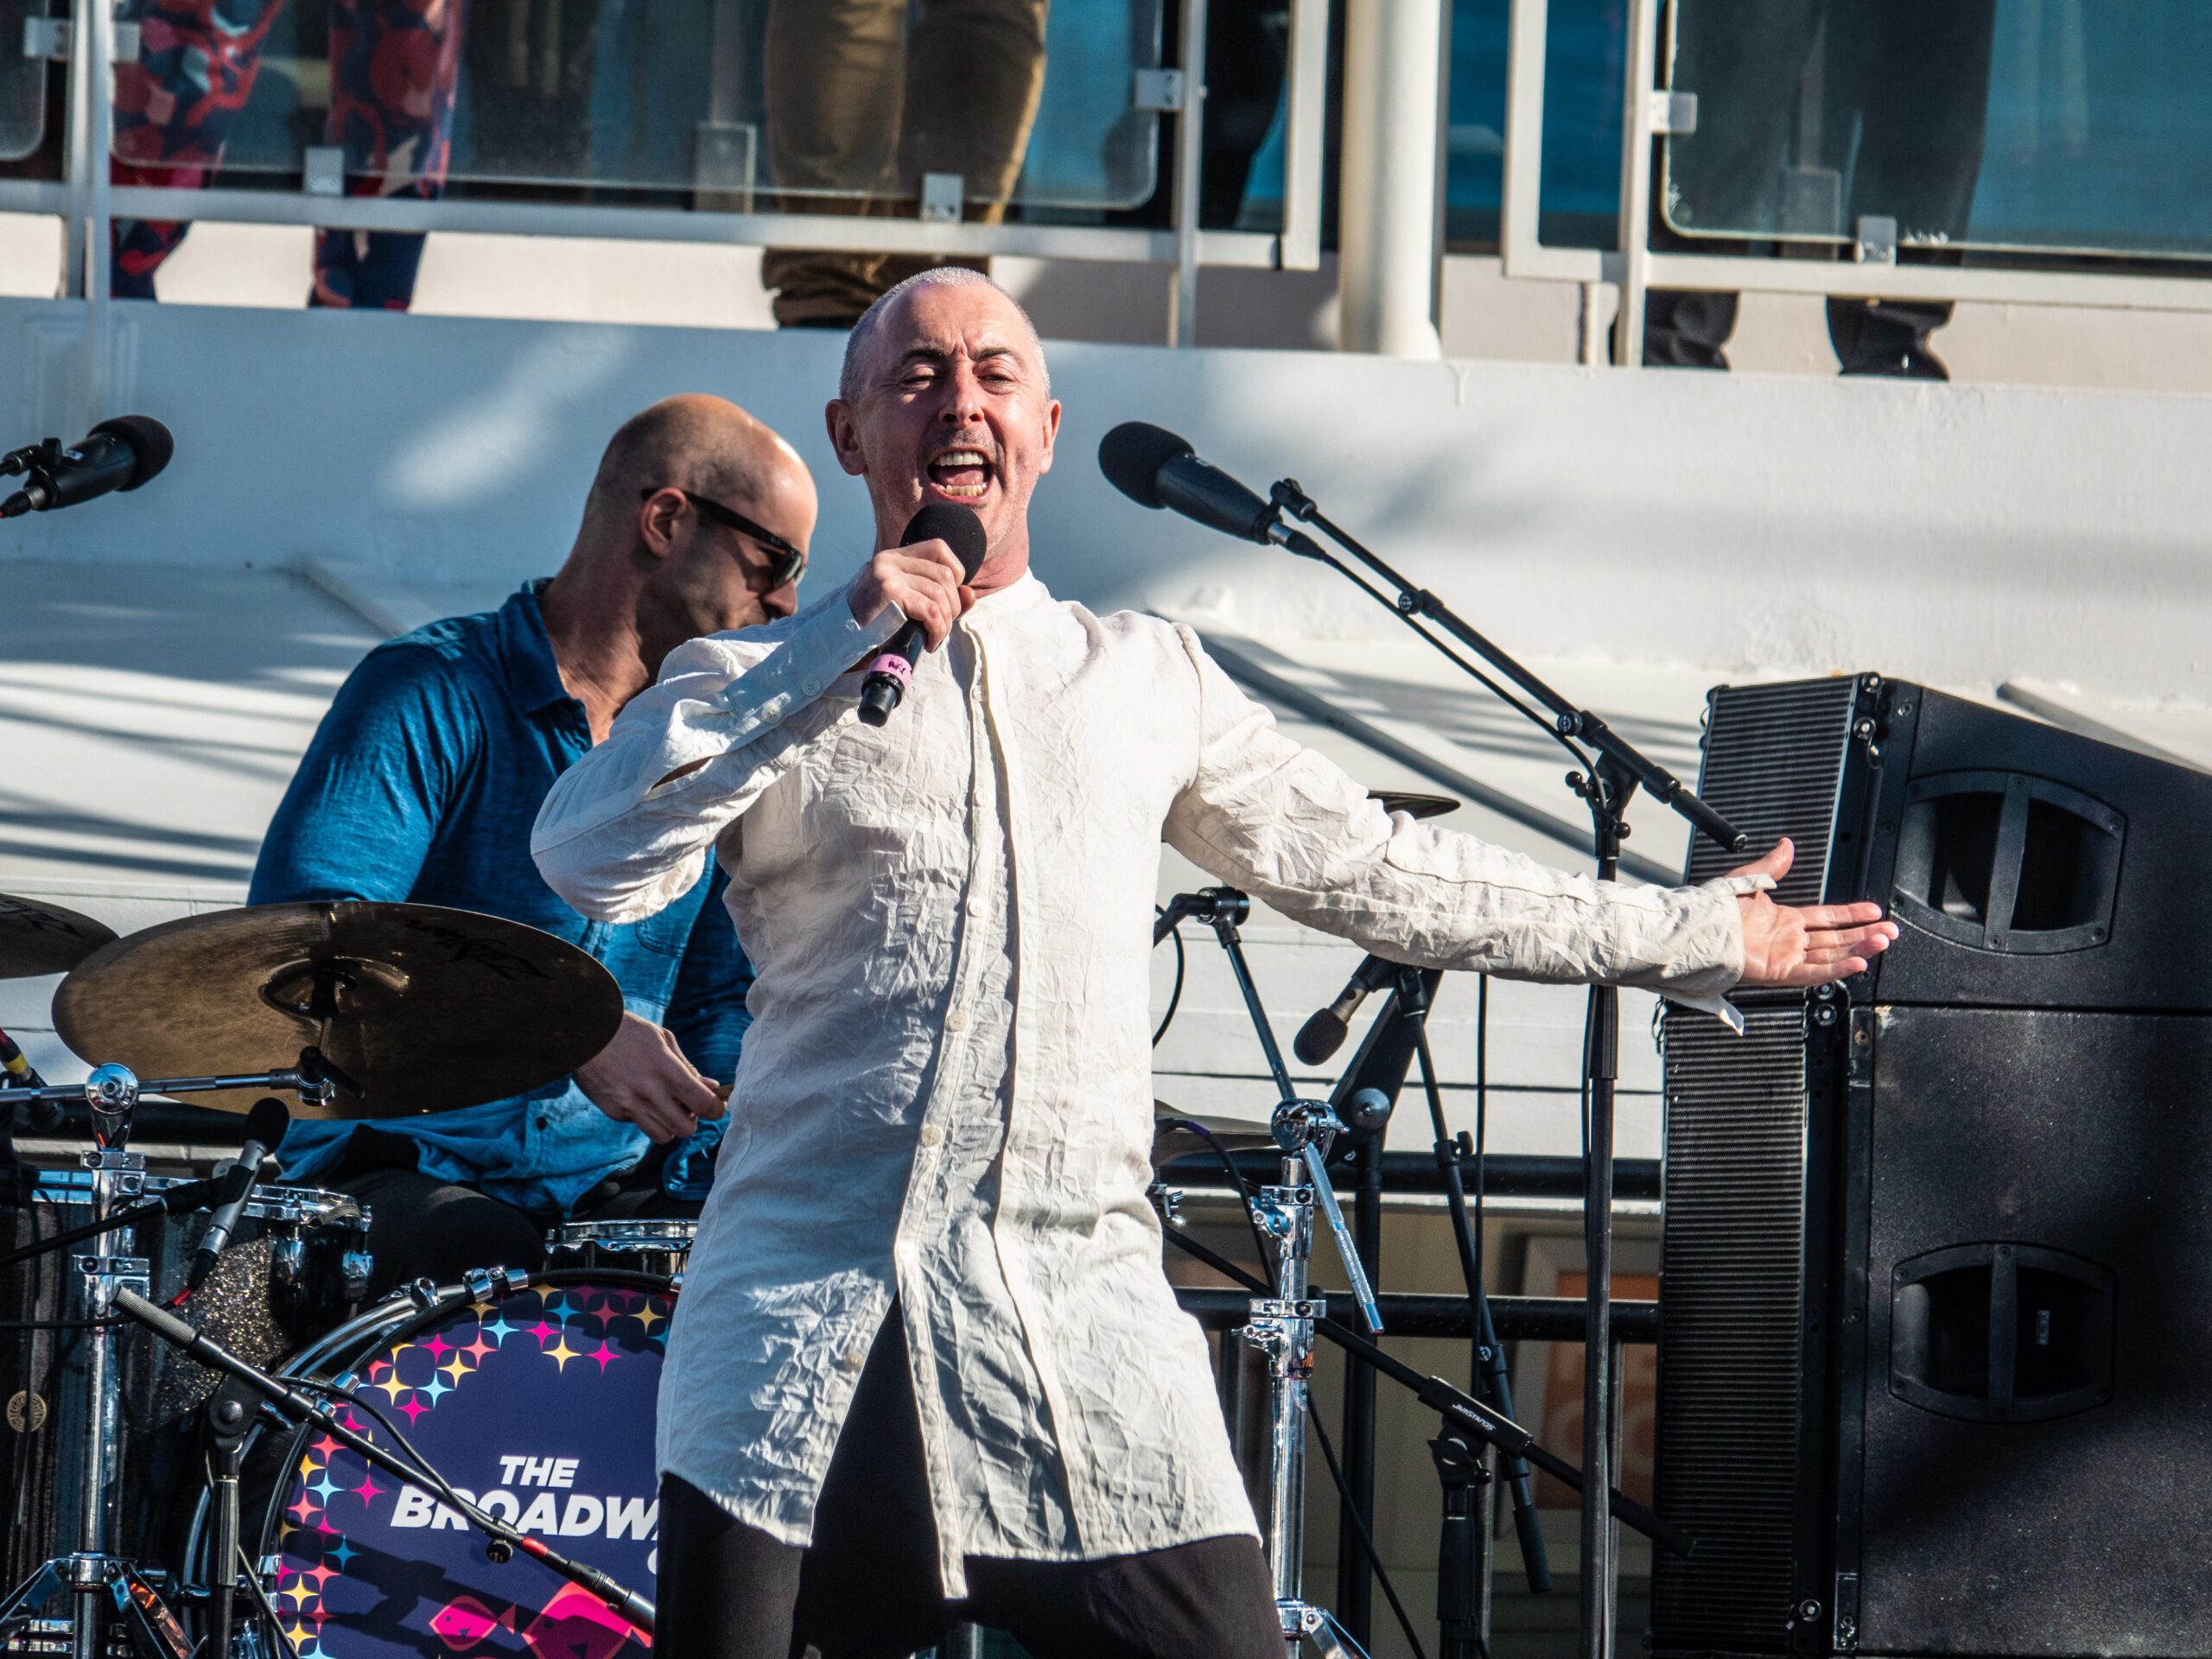 Alan Cumming on The Broadway Cruise. Photo by Will Byington.